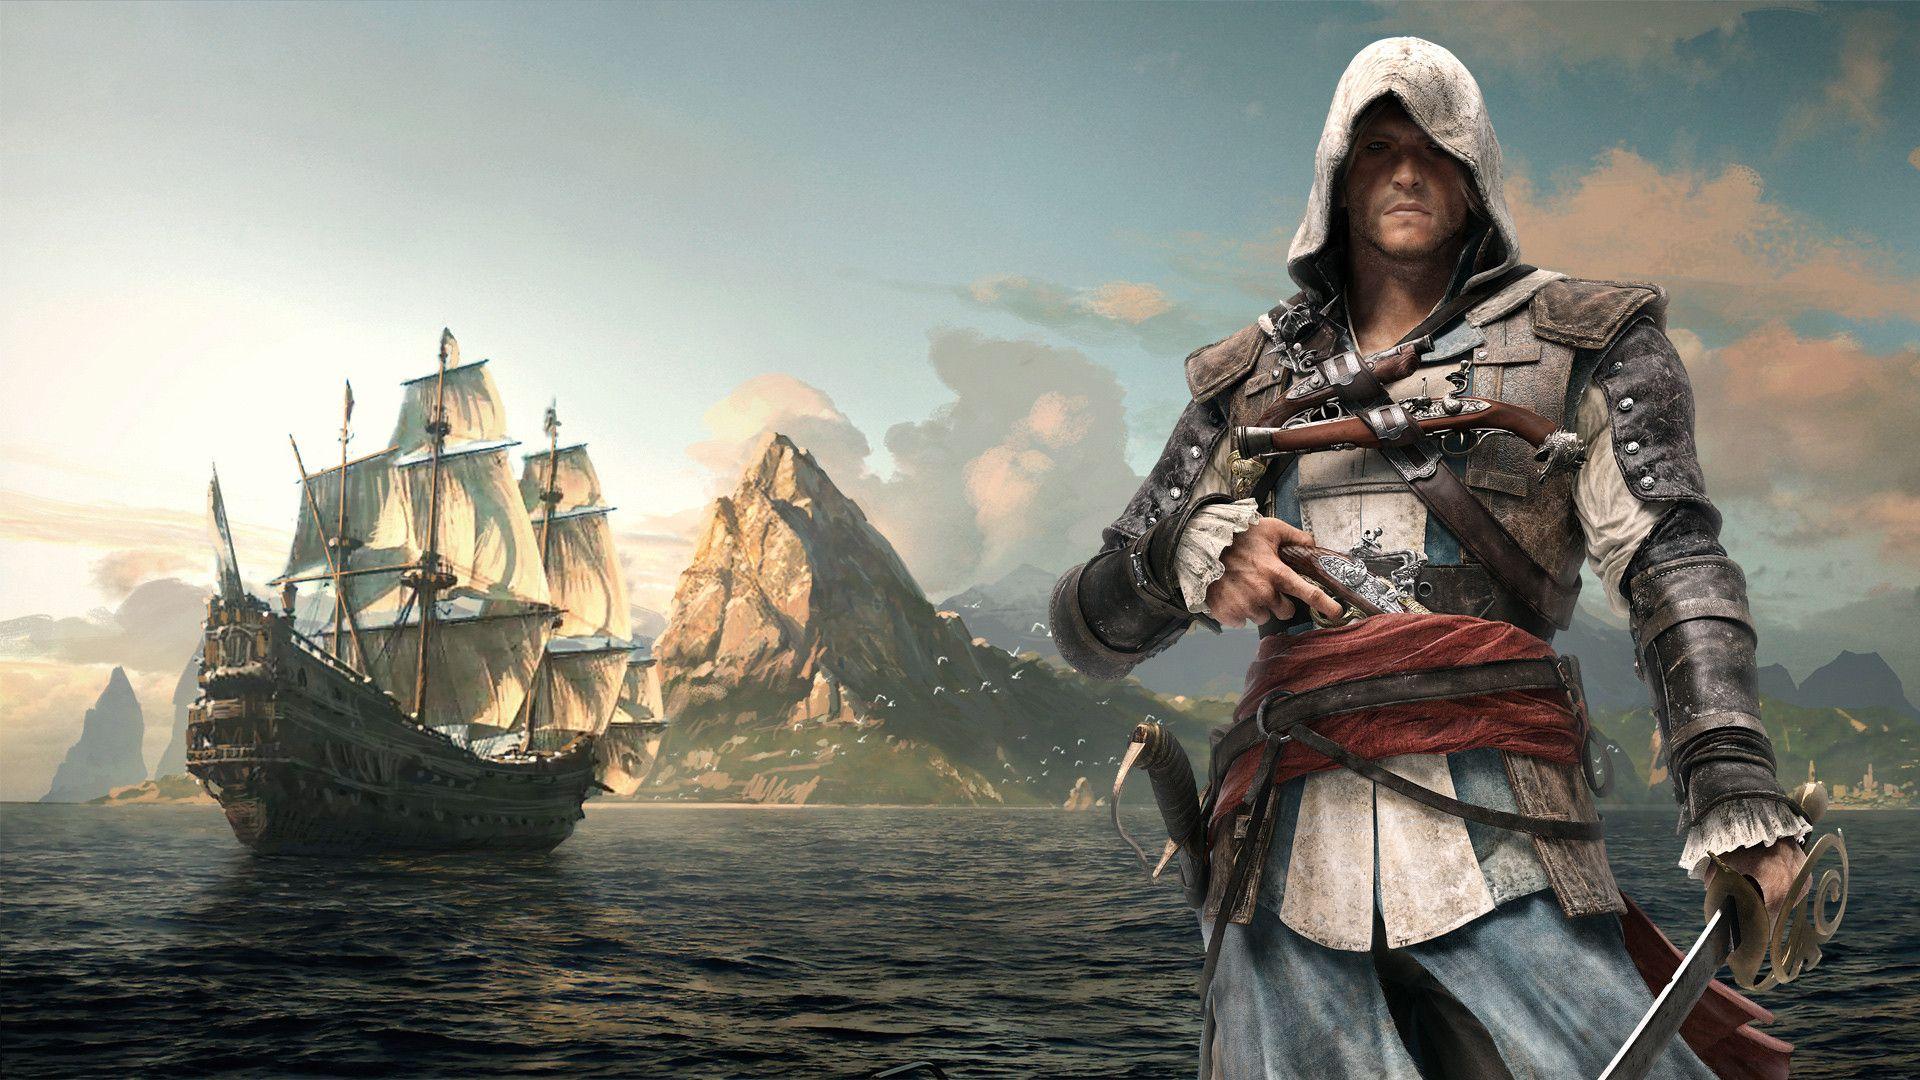 Assassin's Creed Black Flag Wallpapers - Top Free Assassin's Creed ...